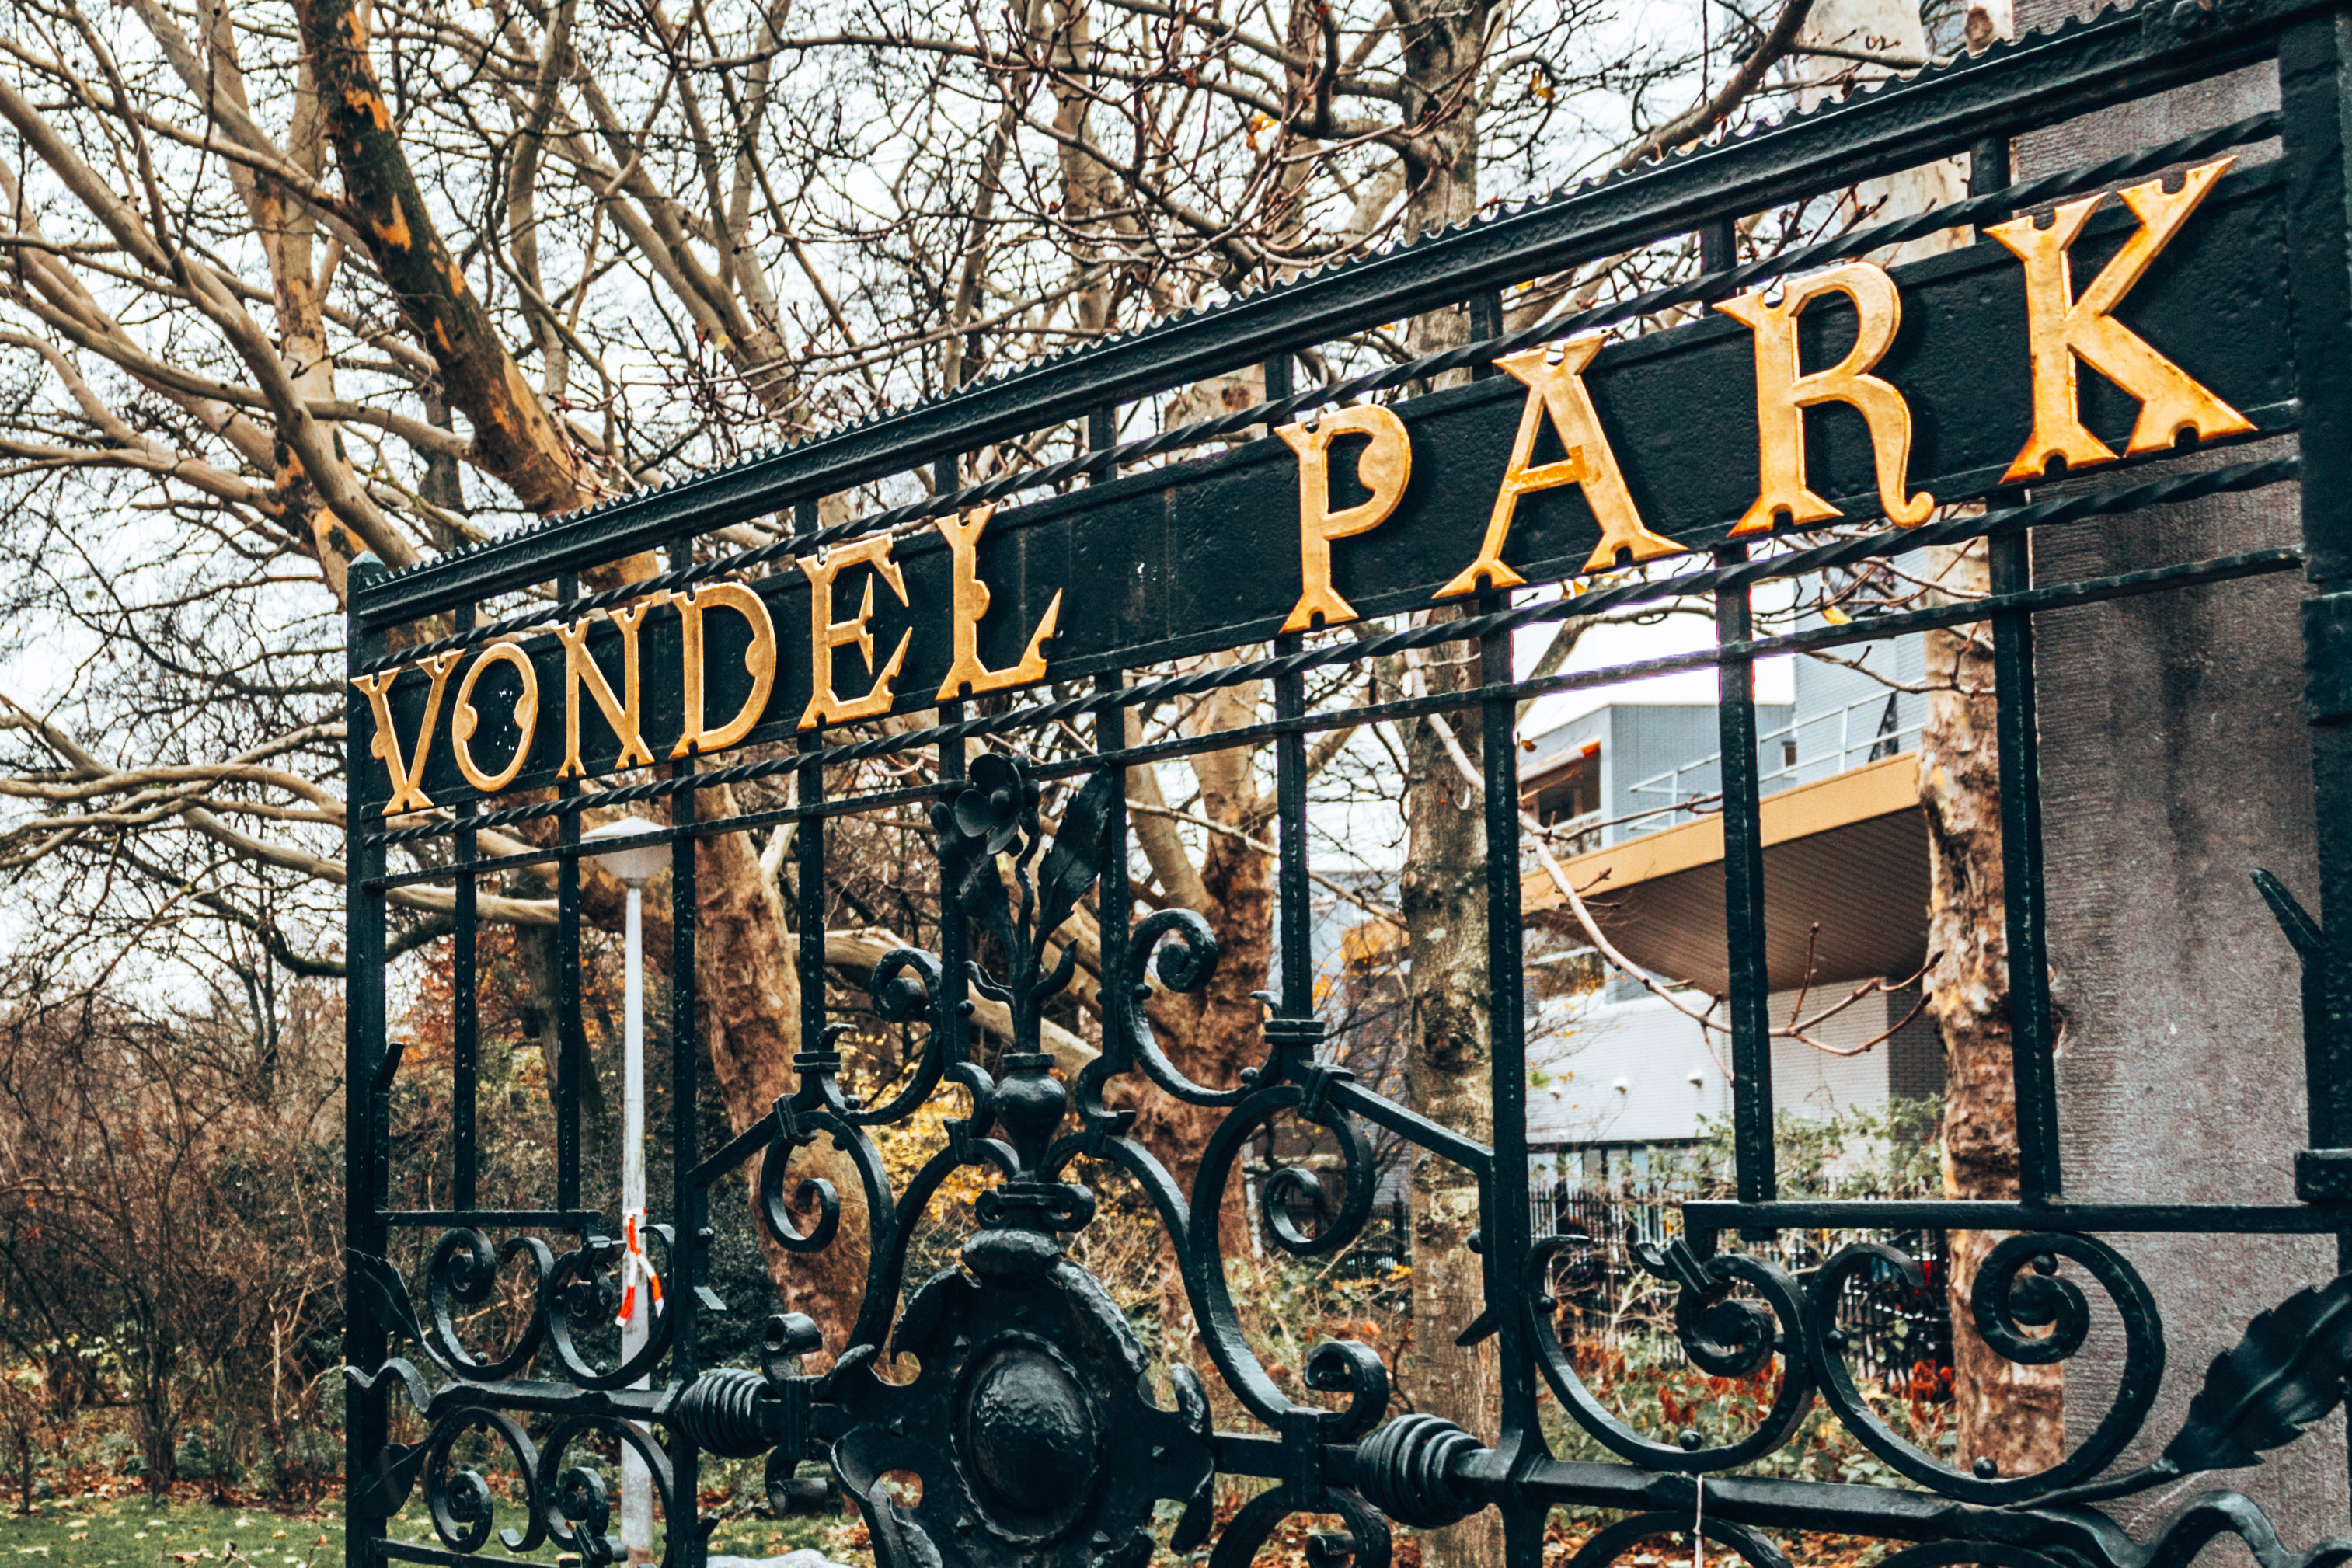 The entrance to the Vondel Park in Amsterdam, Netherlands